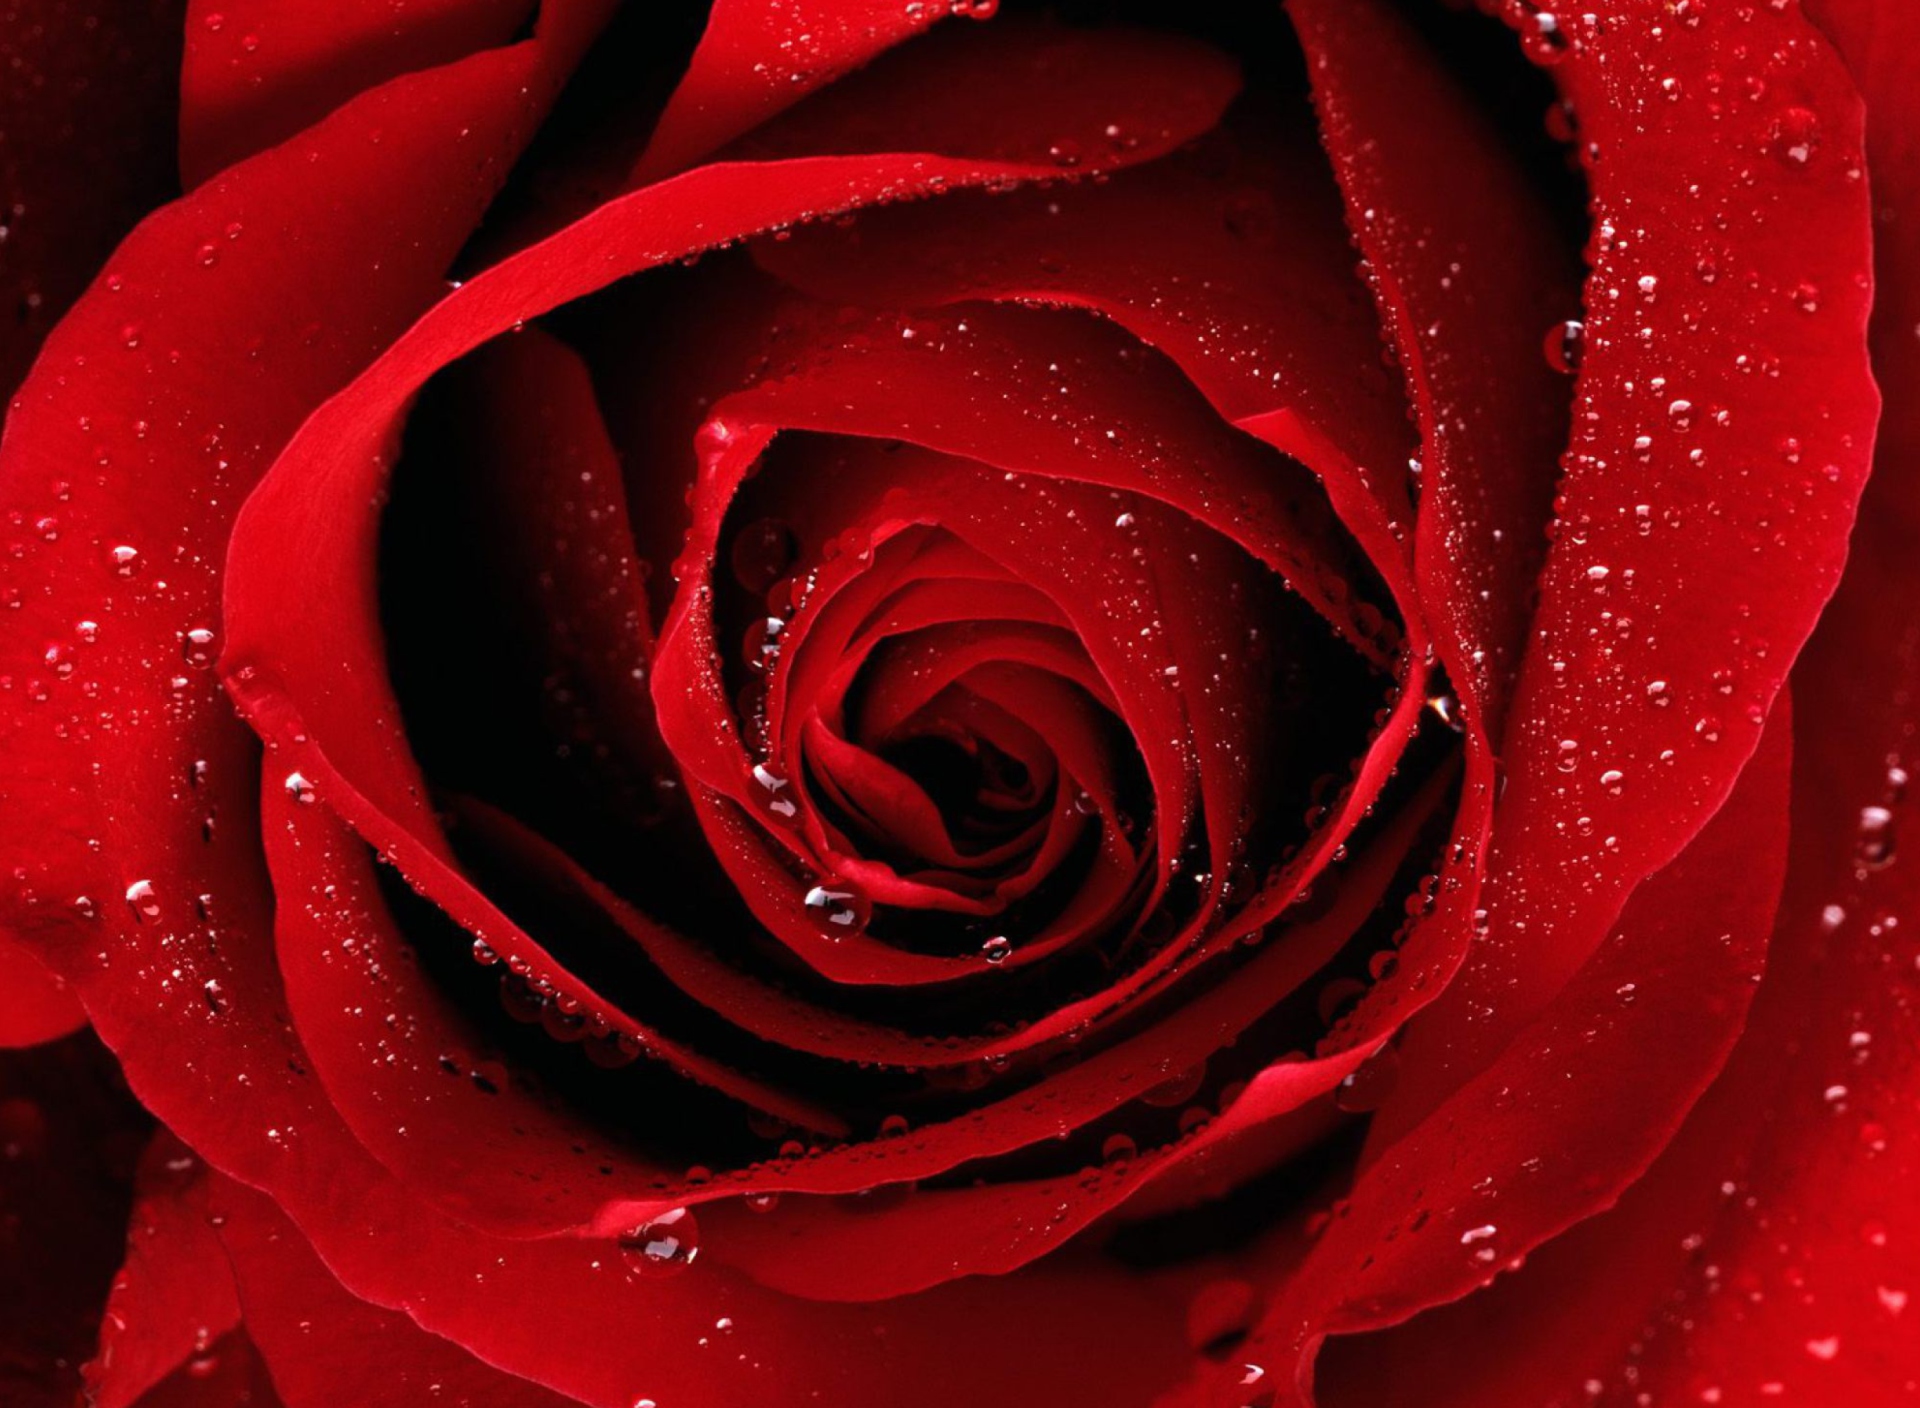 Das Scarlet Rose With Water Drops Wallpaper 1920x1408